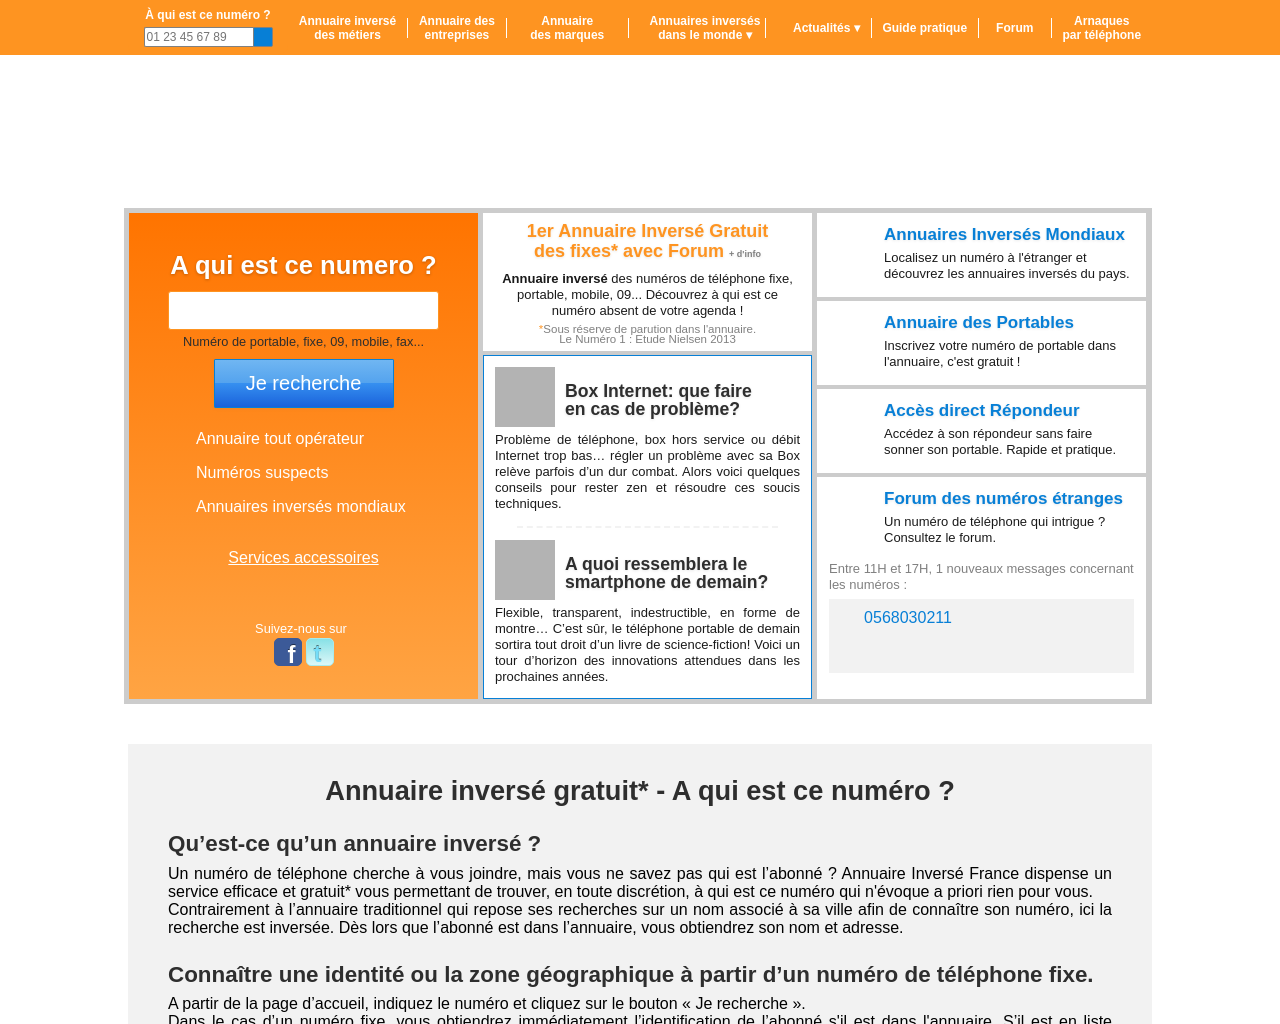 www.annuaire-inverse-france.com